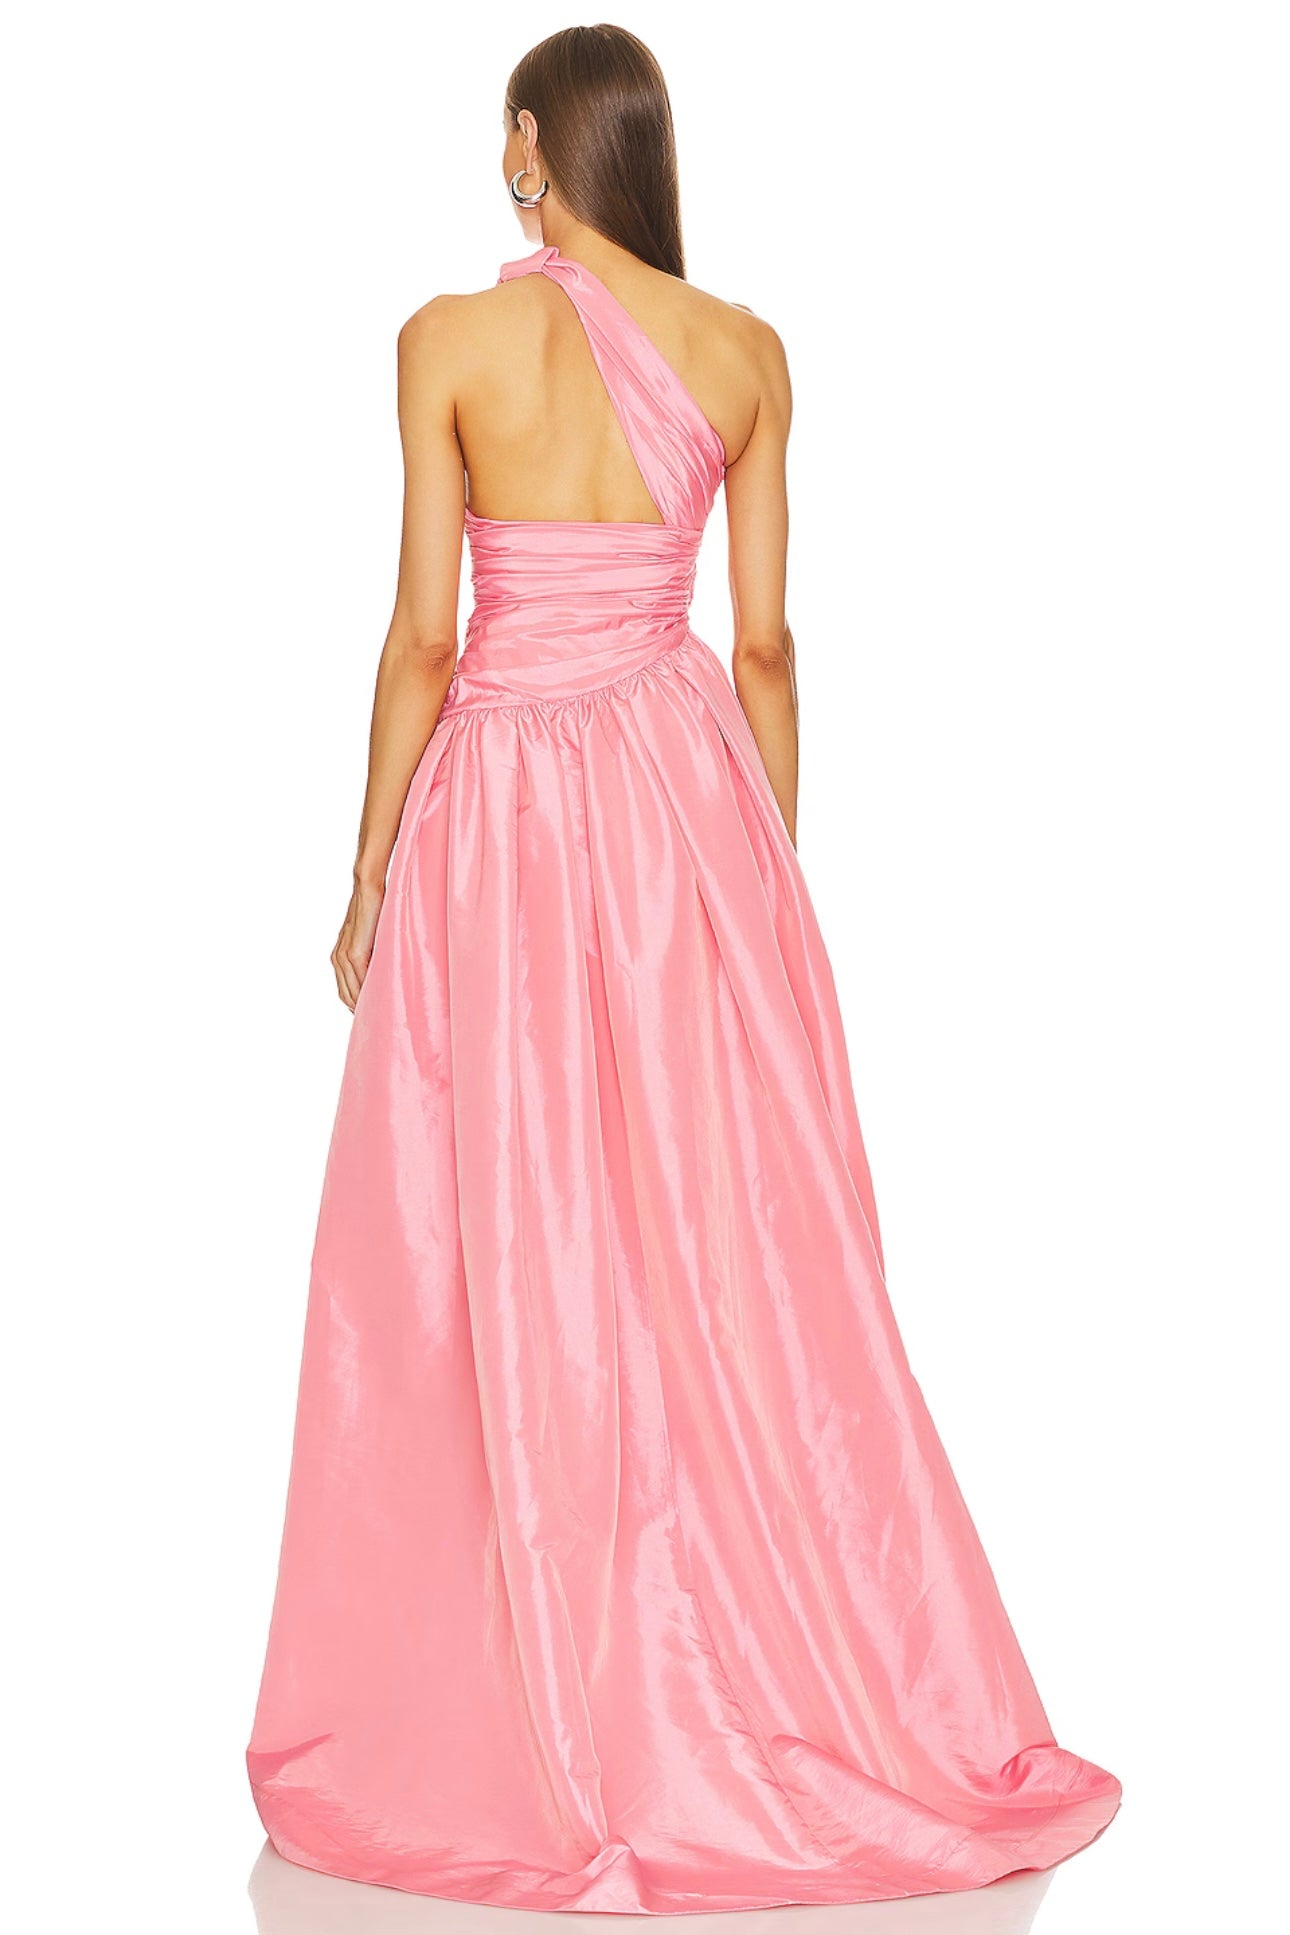 NBD ‘Chey’ Gown